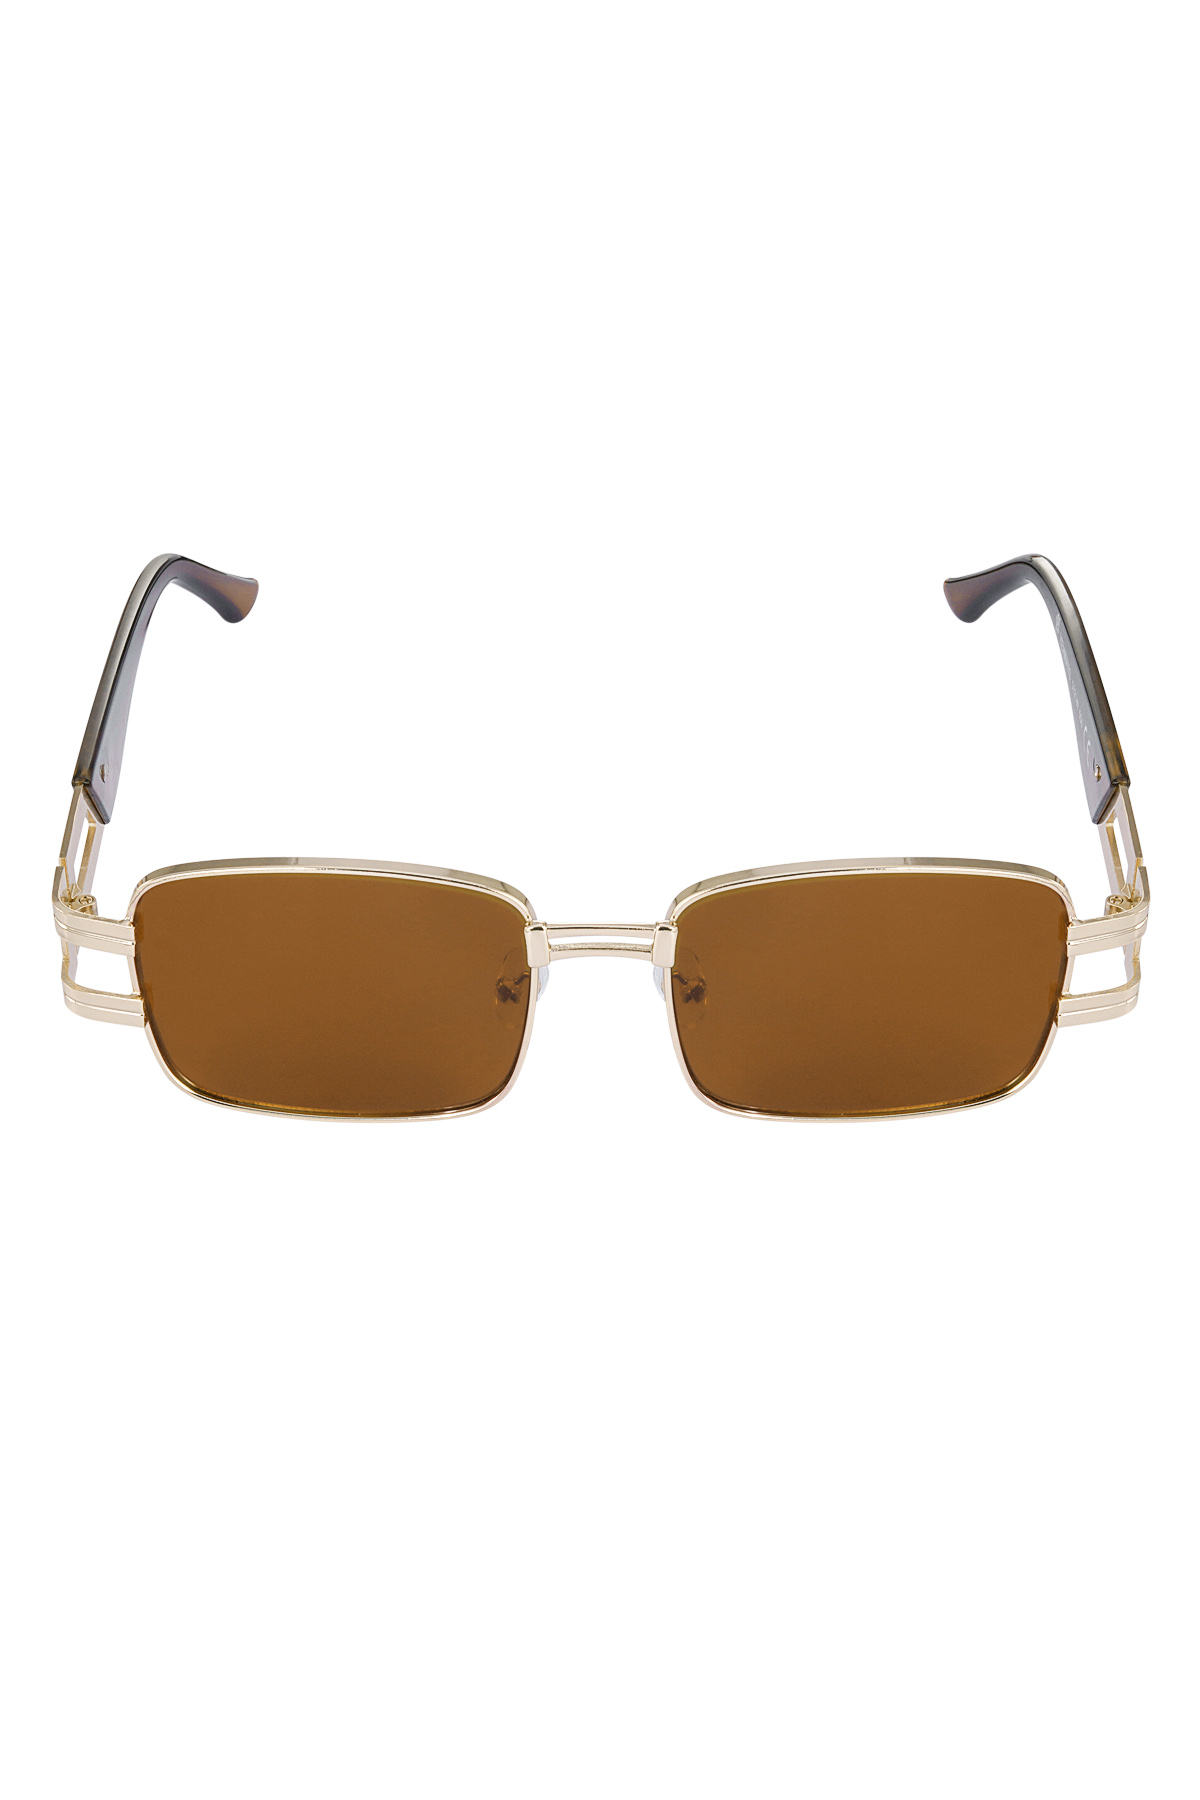 Sunglasses simple metal essential - brown h5 Picture4